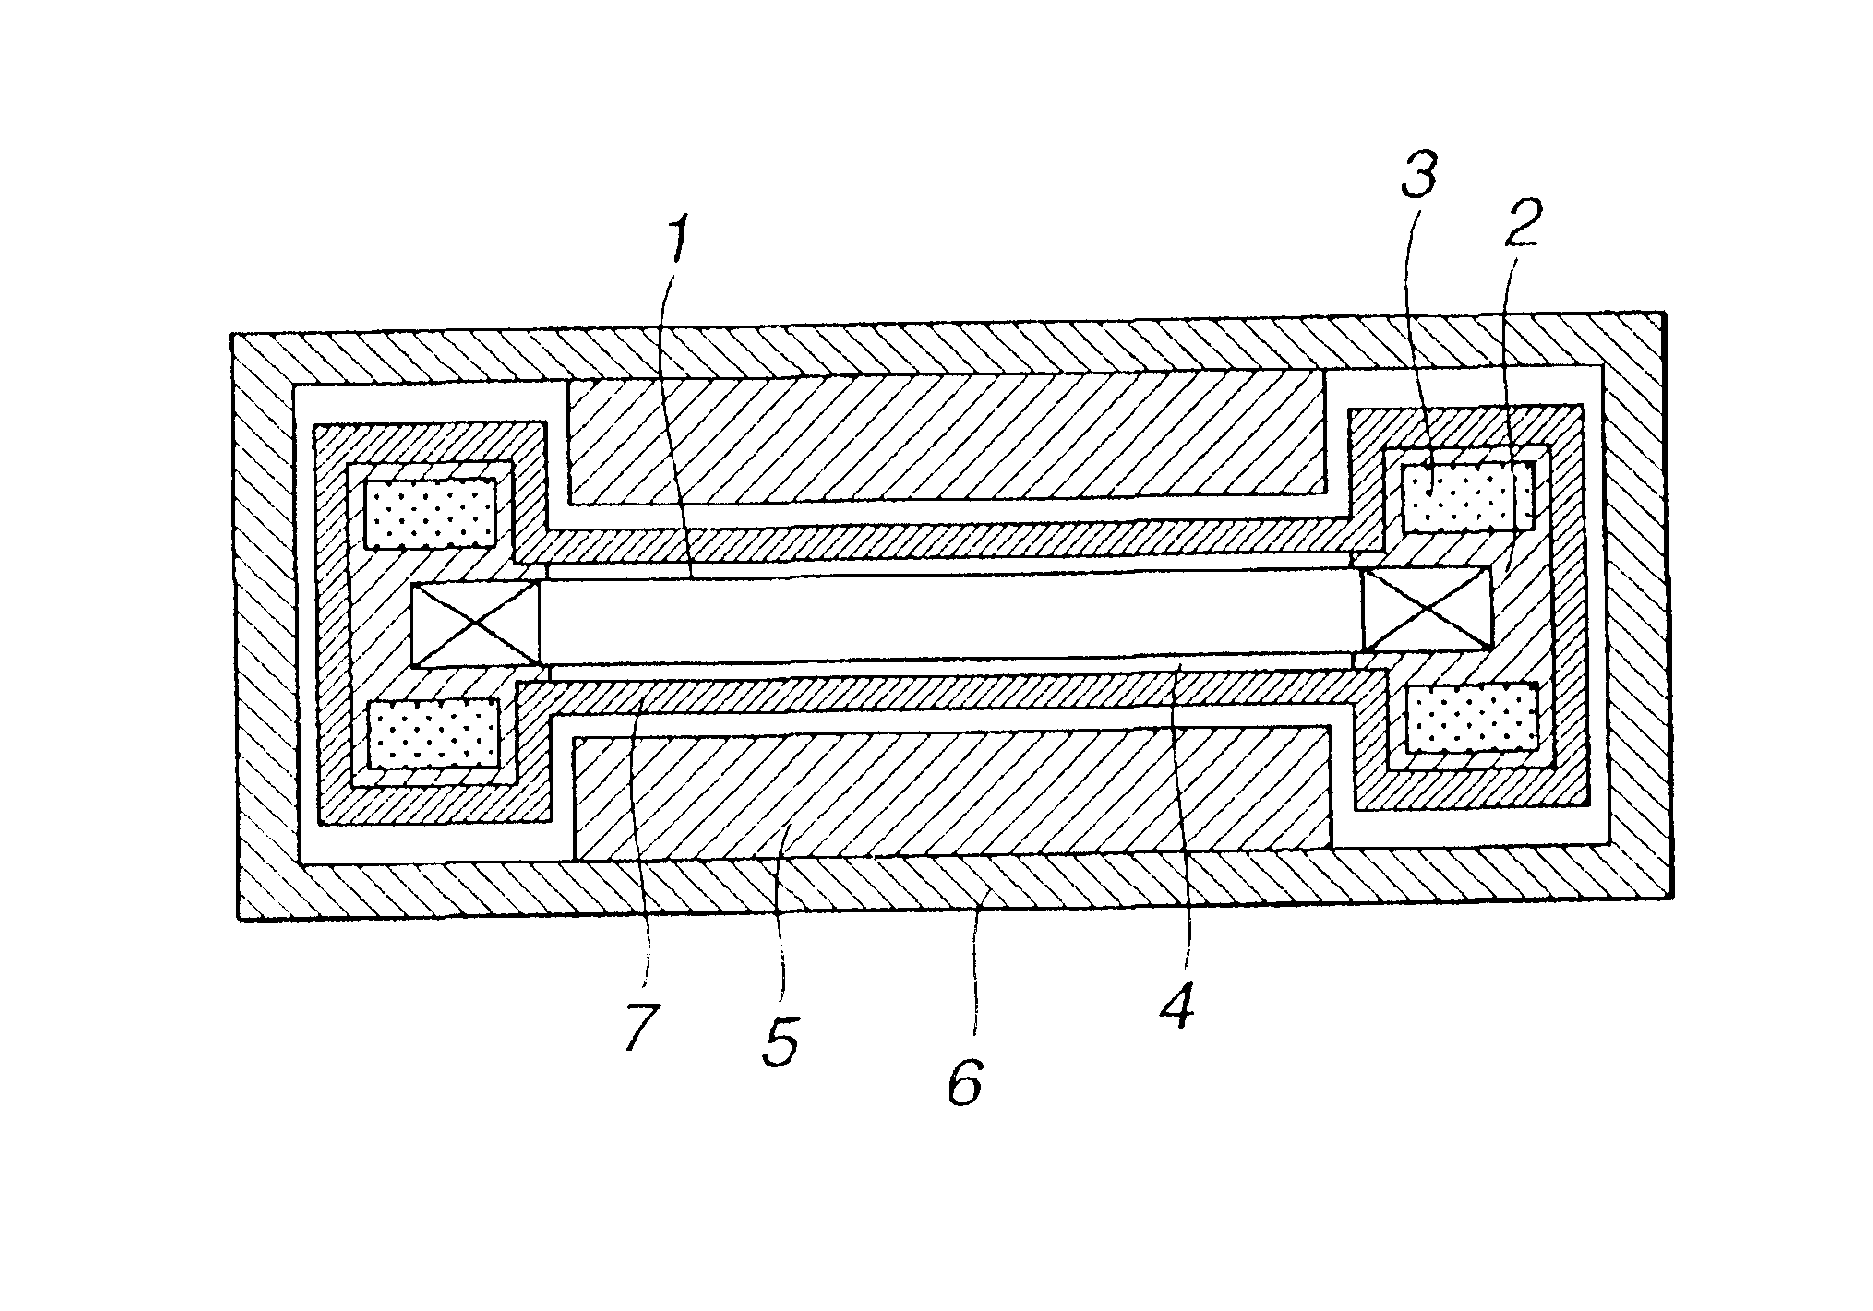 Electromagnetic actuator having an armature coil surrounded by heat-conducting anisotropy material and exposure apparatus